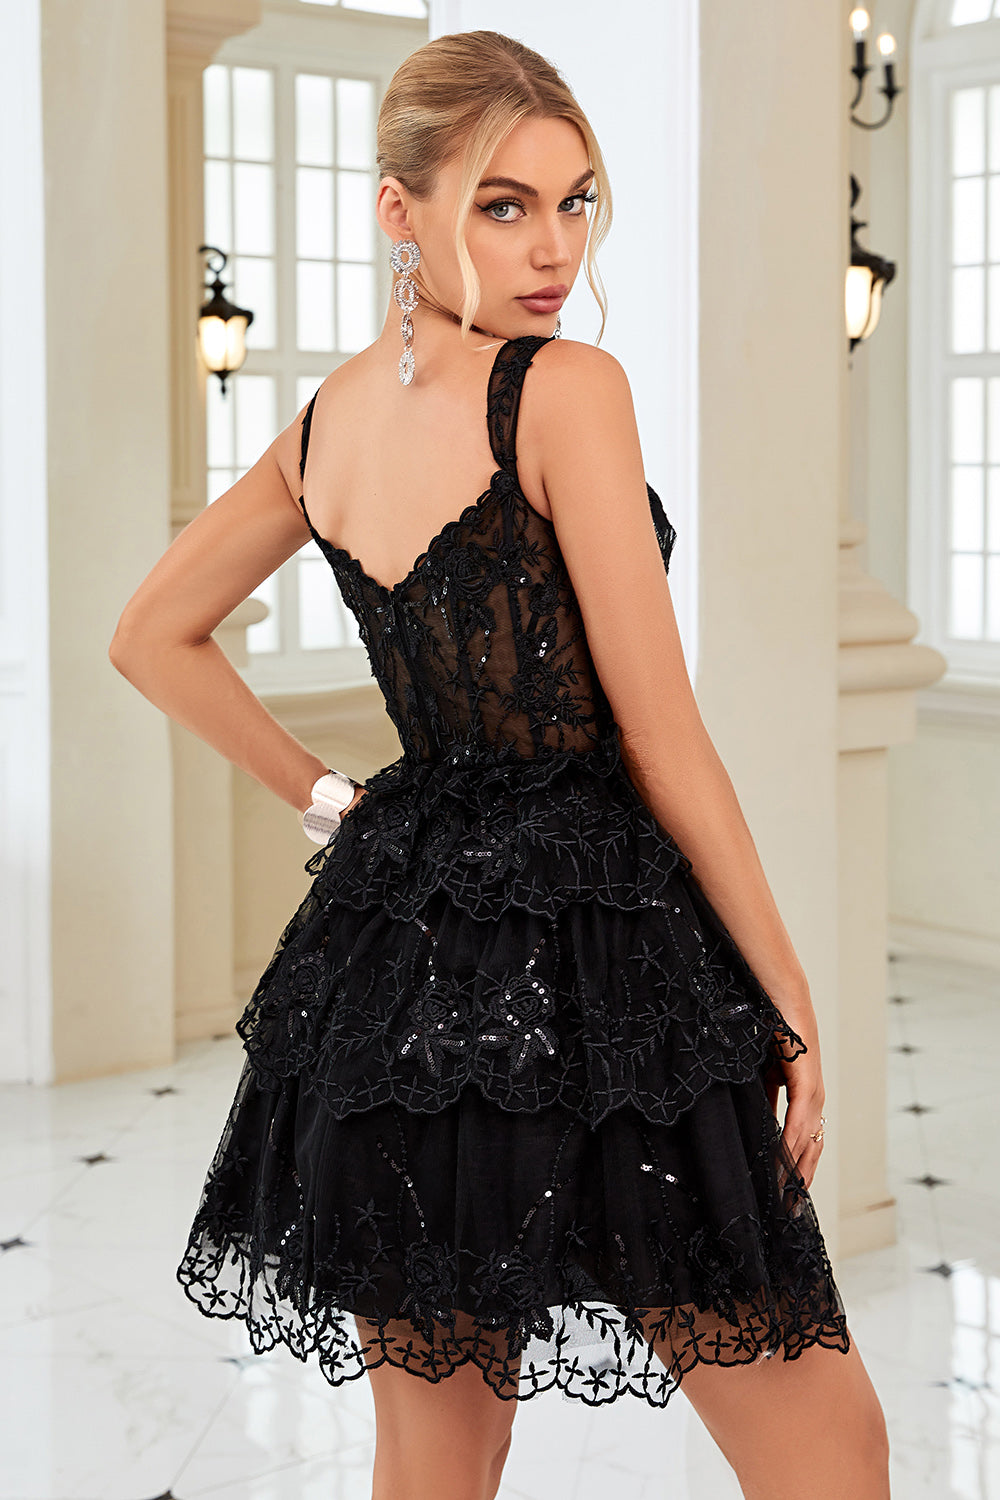 Zapakasa Women Black Corset Homecoming Dress A Line Off the Shoulder  Cocktail Dress with Lace